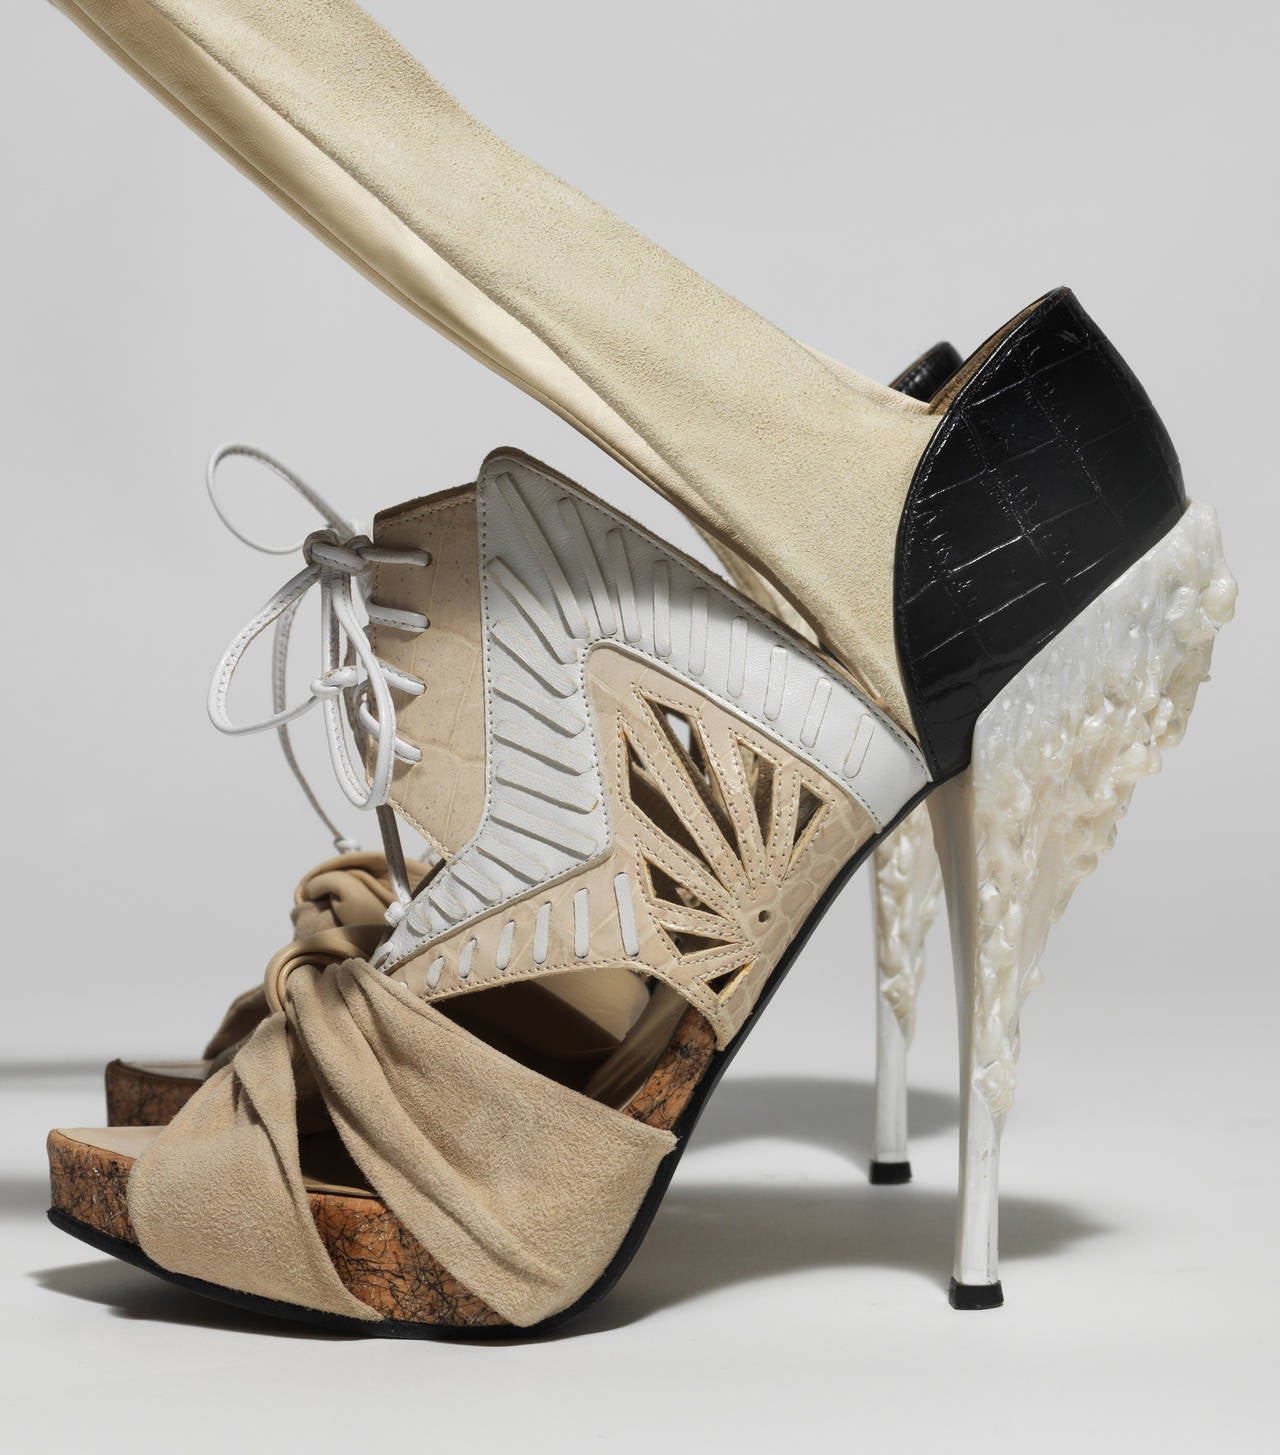 Brown Nicholas Kirkwood for Rodarte Leather Heels With Melted Heels, Fall 2010